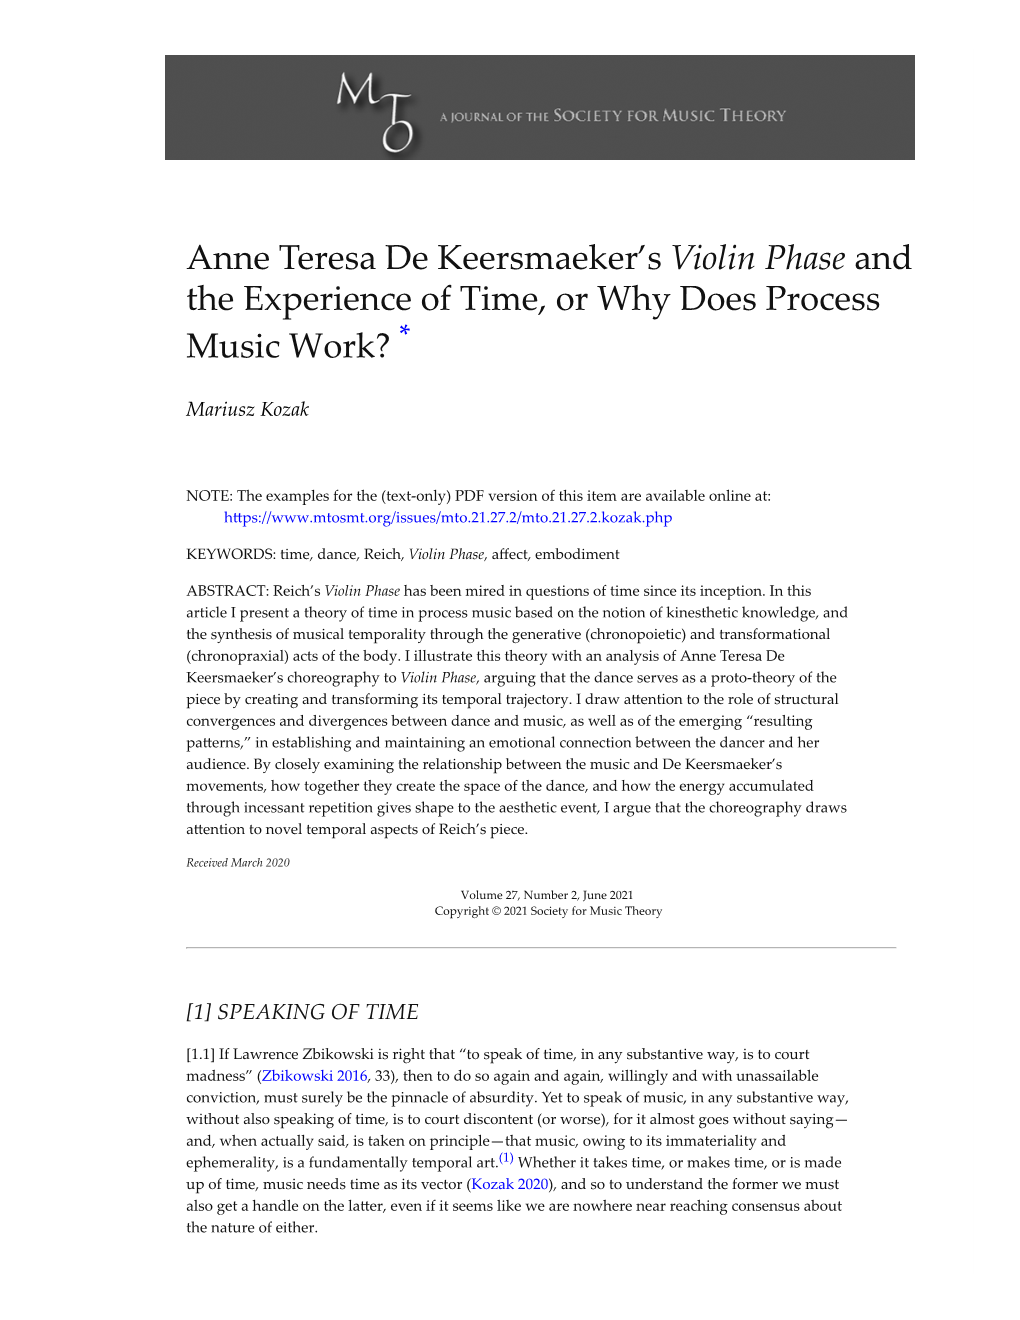 Anne Teresa De Keersmaeker's Violin Phase and the Experience of Time